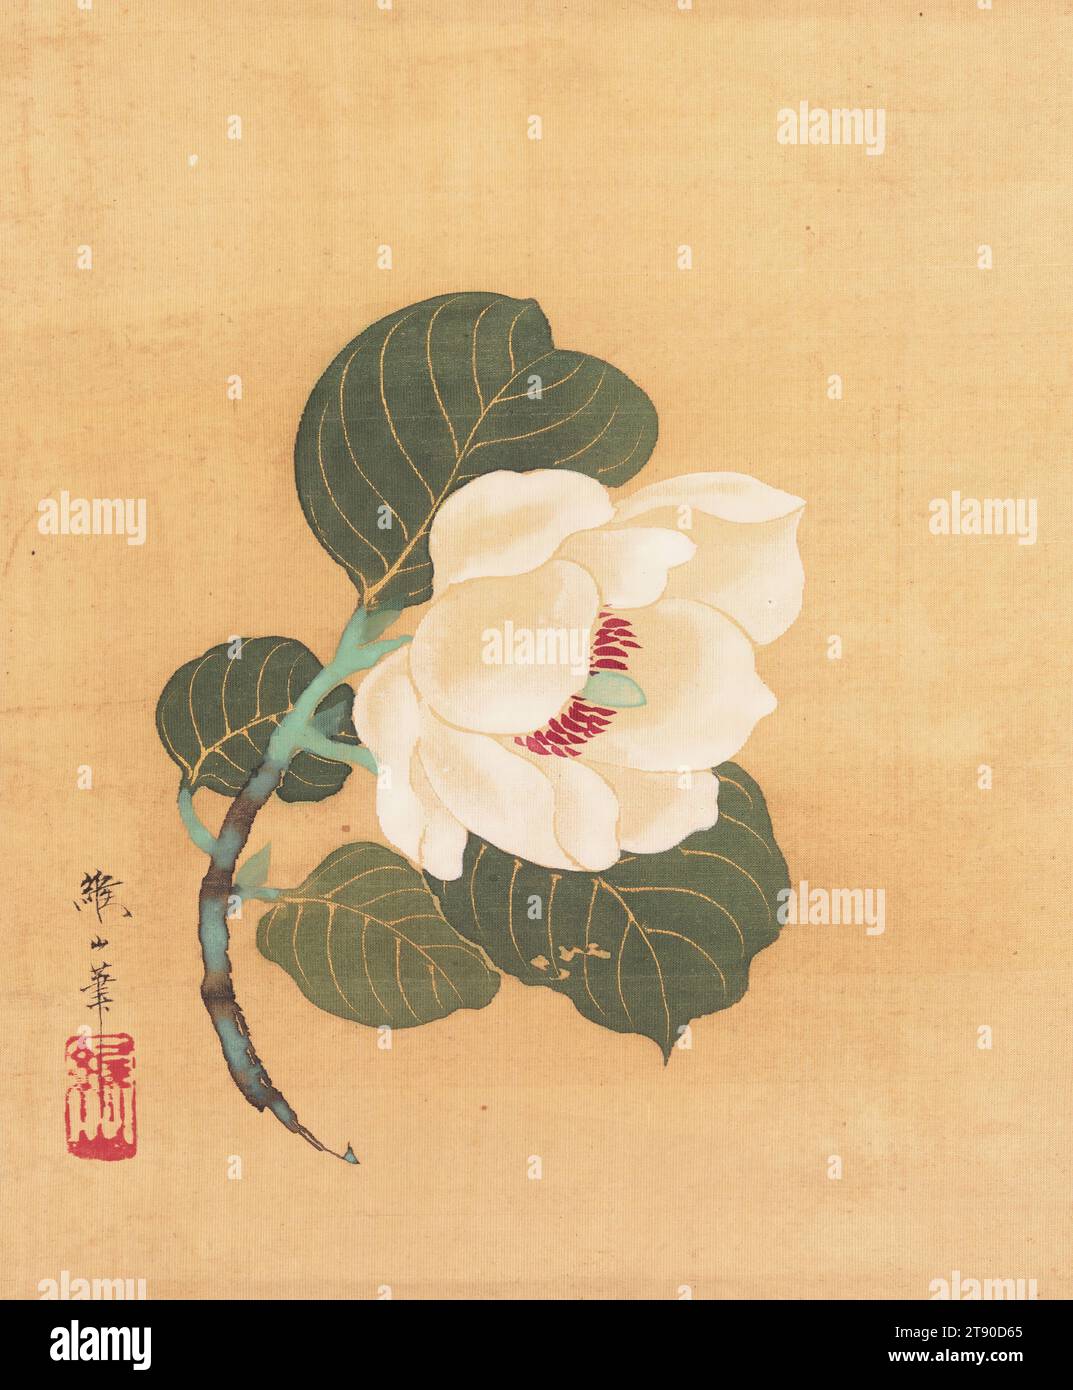 Camellia japonica, first half 19th century, Nonoyama Kōzan, Japanese, 1780 - 1847, 7 9/16 × 6 1/4 in. (19.21 × 15.88 cm) (image)42 9/16 × 12 5/16 in. (108.11 × 31.27 cm) (mount, without roller), Ink and color on silk, Japan, 19th century Stock Photo